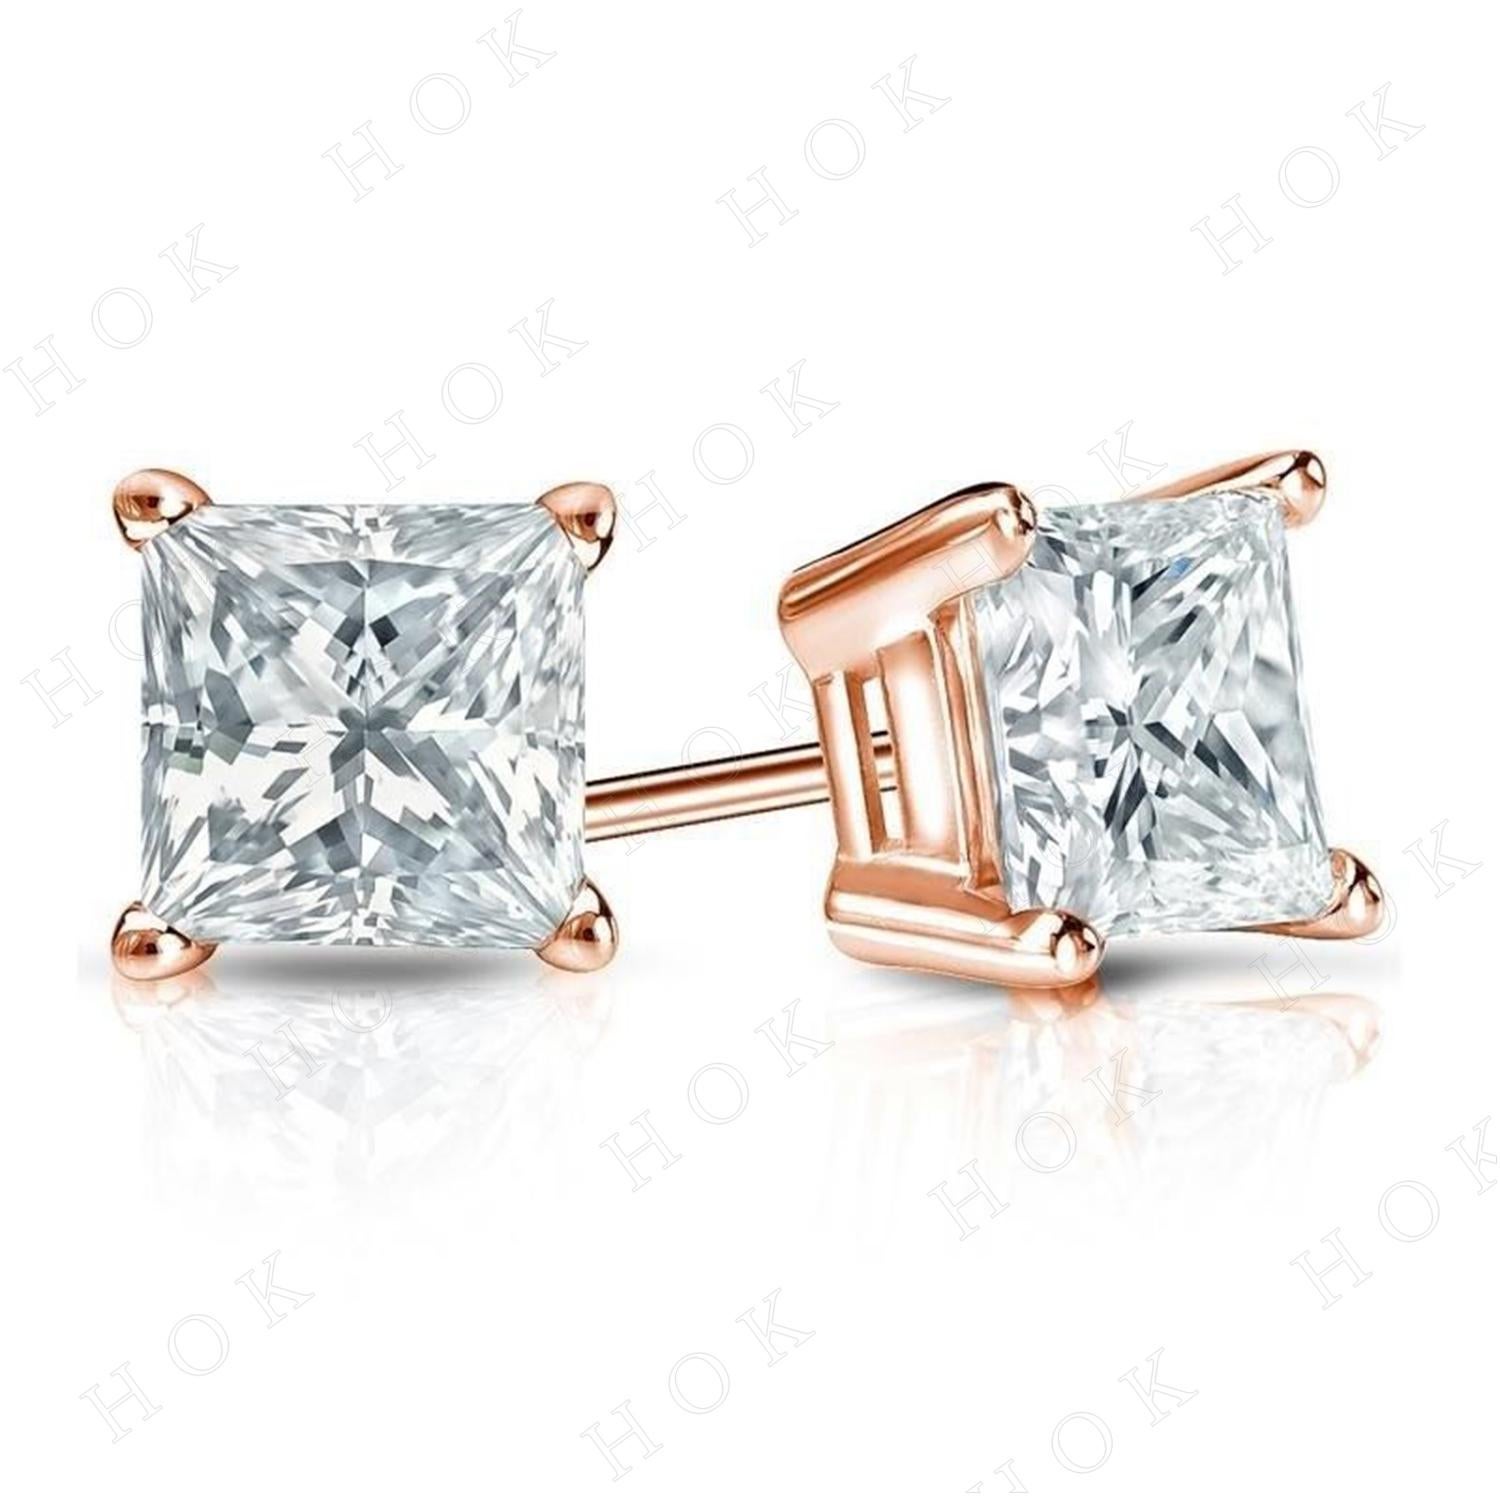 Each Stone is 5 carat which makes the total of 10 carat. The quality of the diamonds are H I color with SI clarity . The classic princess cut diamond stud earrings comes in three different settings. The first and second pictures are four prongs, the